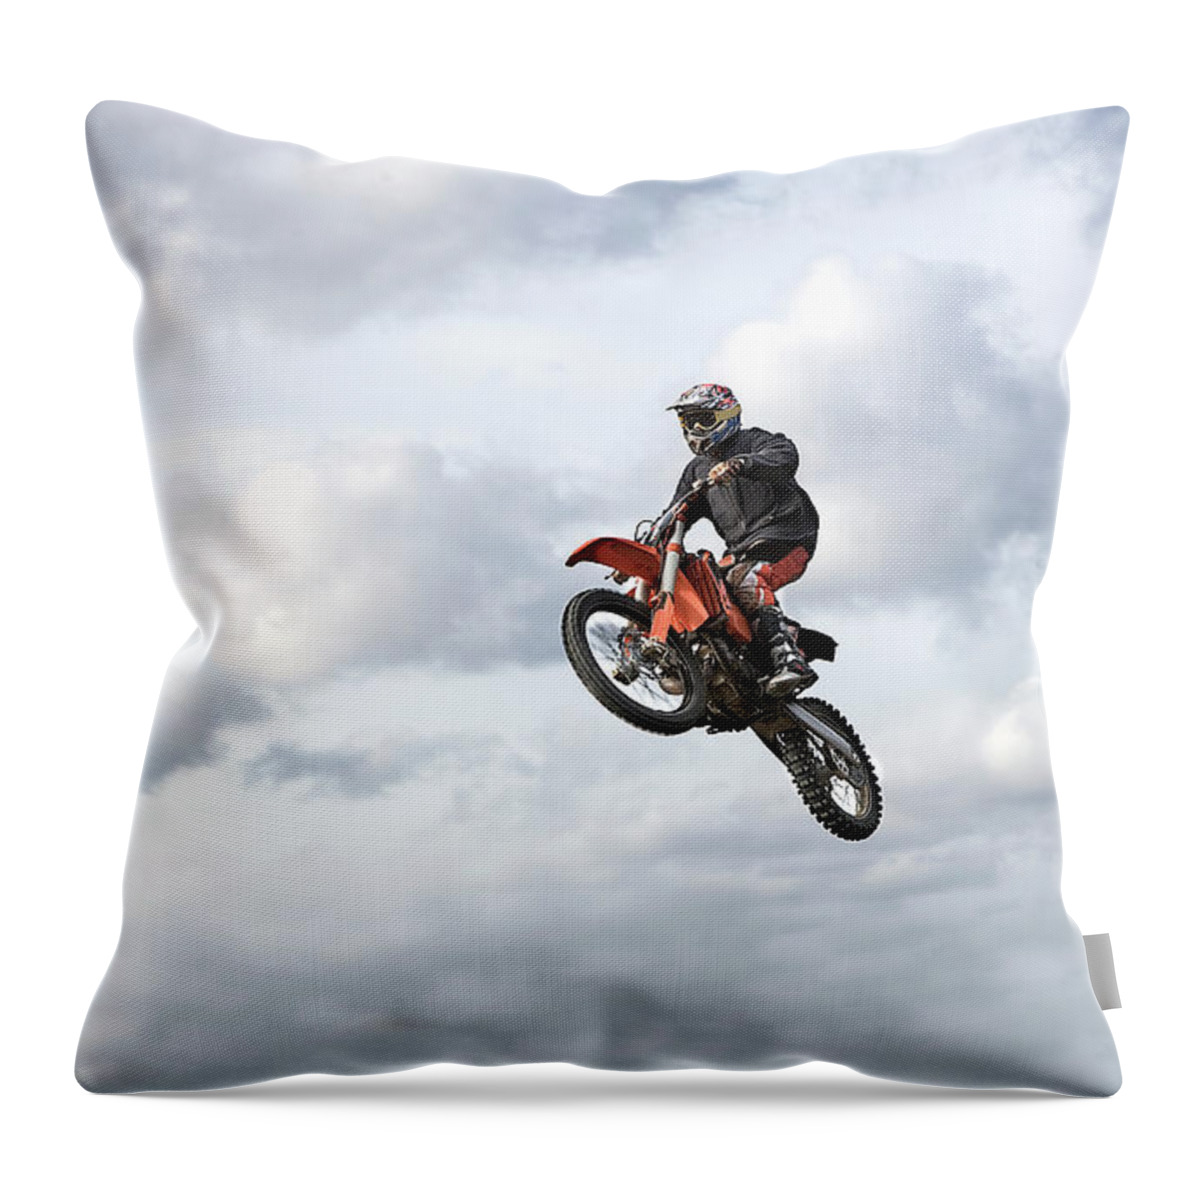 Recreational Pursuit Throw Pillow featuring the photograph Motocross Rider In Mid-air, Low Angle by Claus Christensen